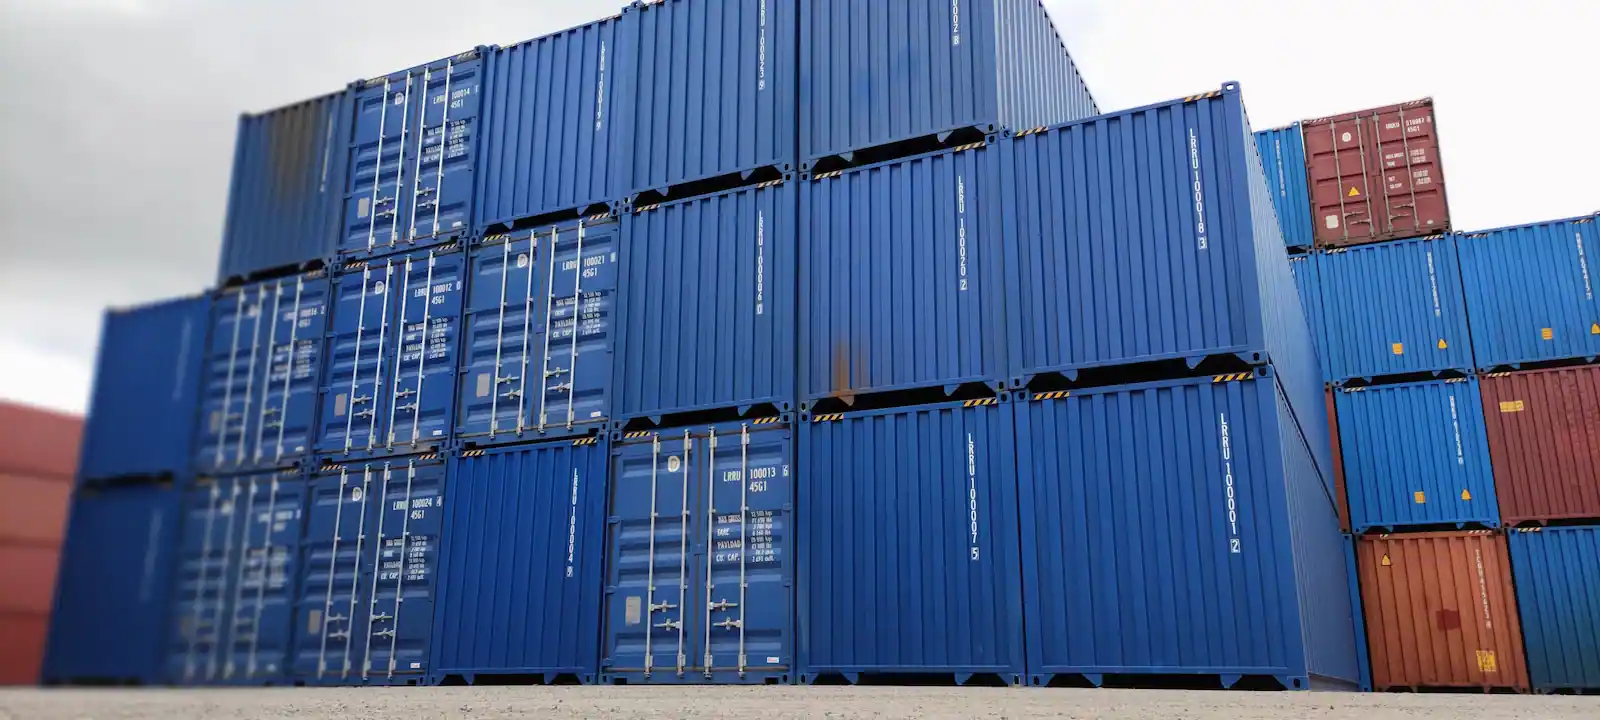 SilverRunner Containers 2 image